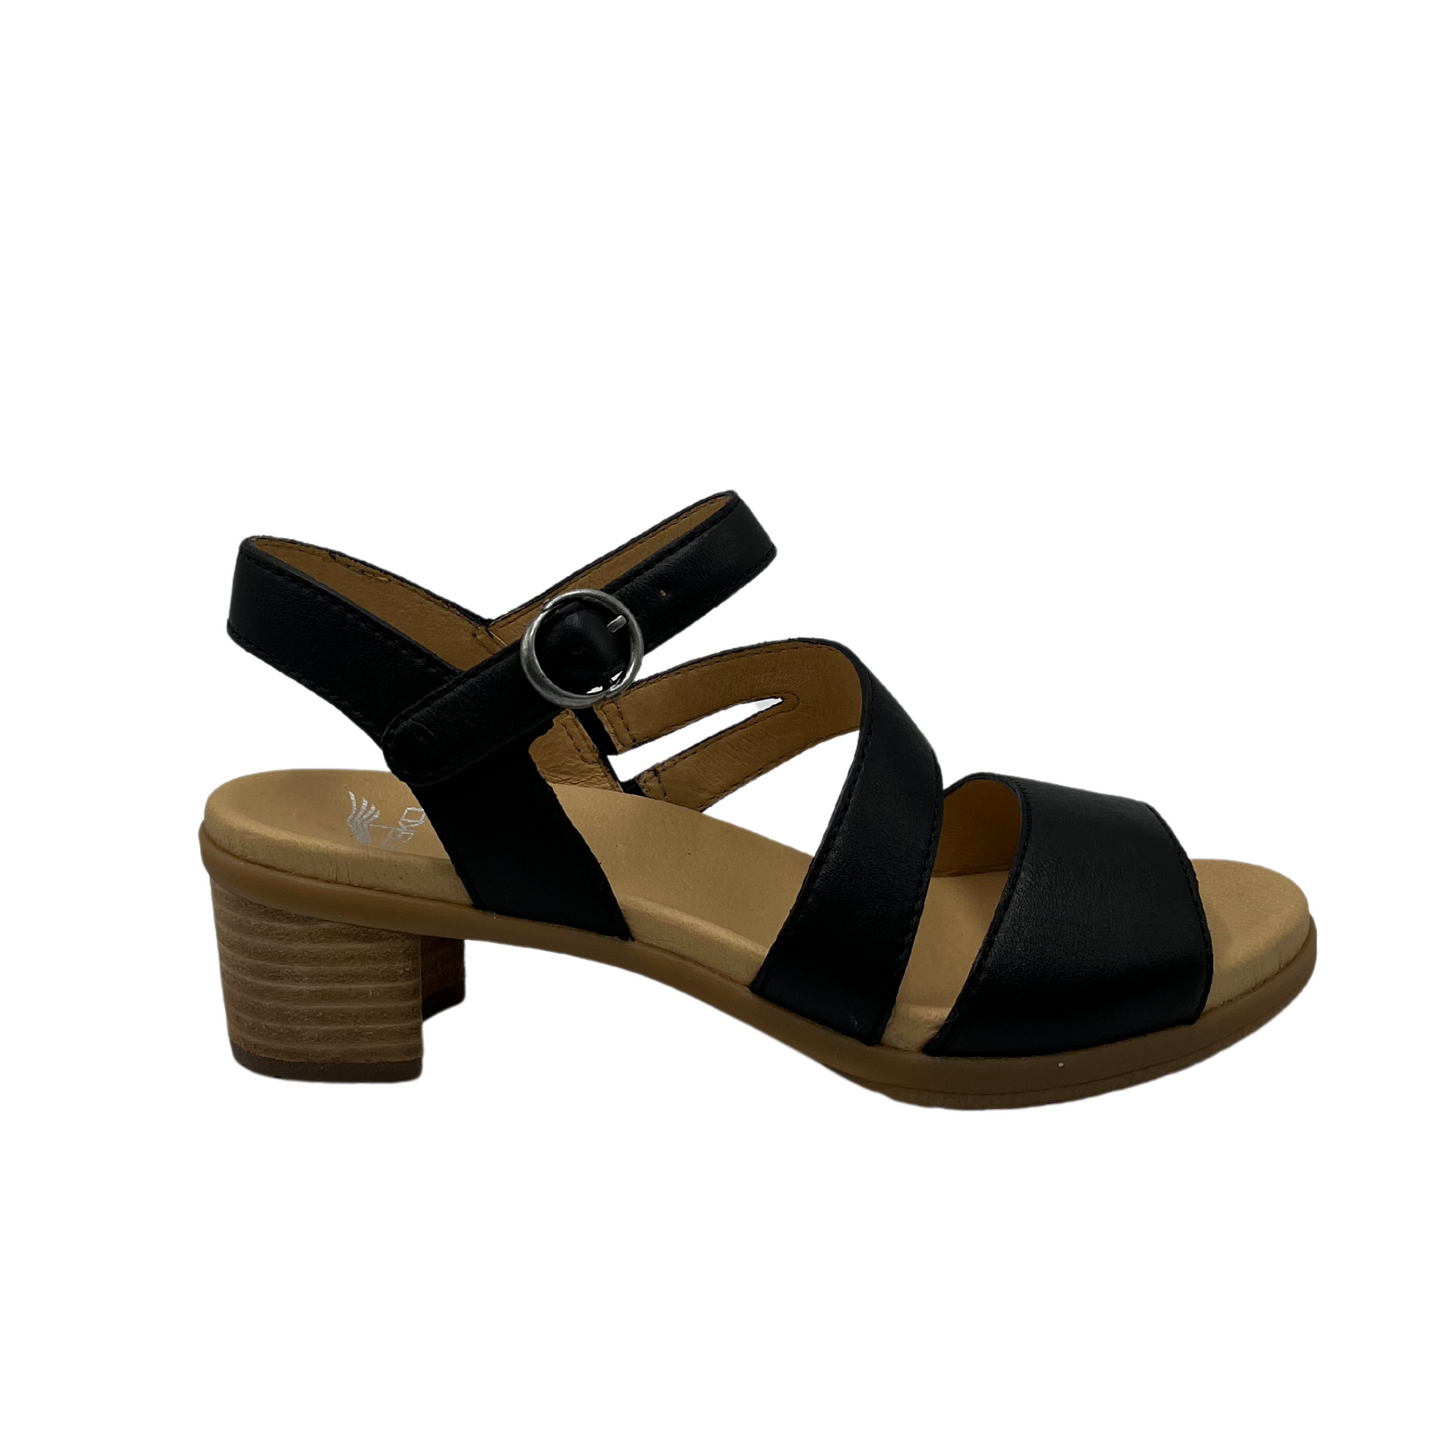 Right facing view of black leather strappy sandal with stacked heel and leather lining